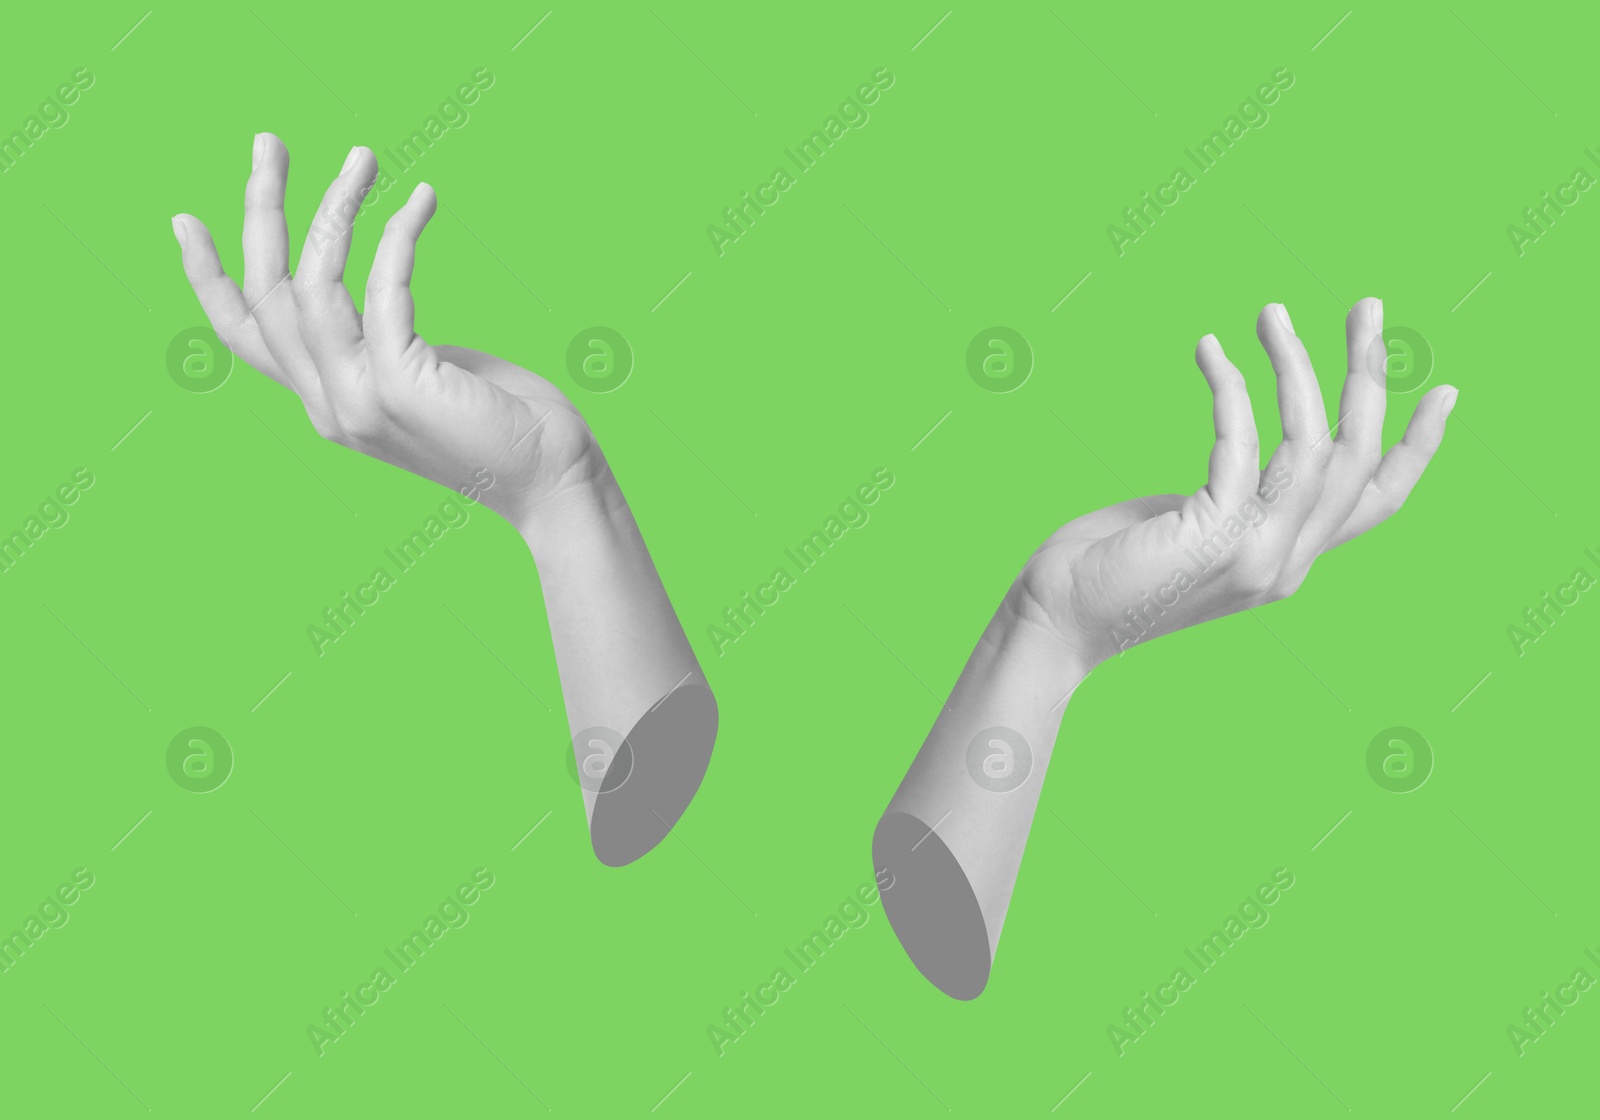 Image of Female hands on light green background, stylish art collage